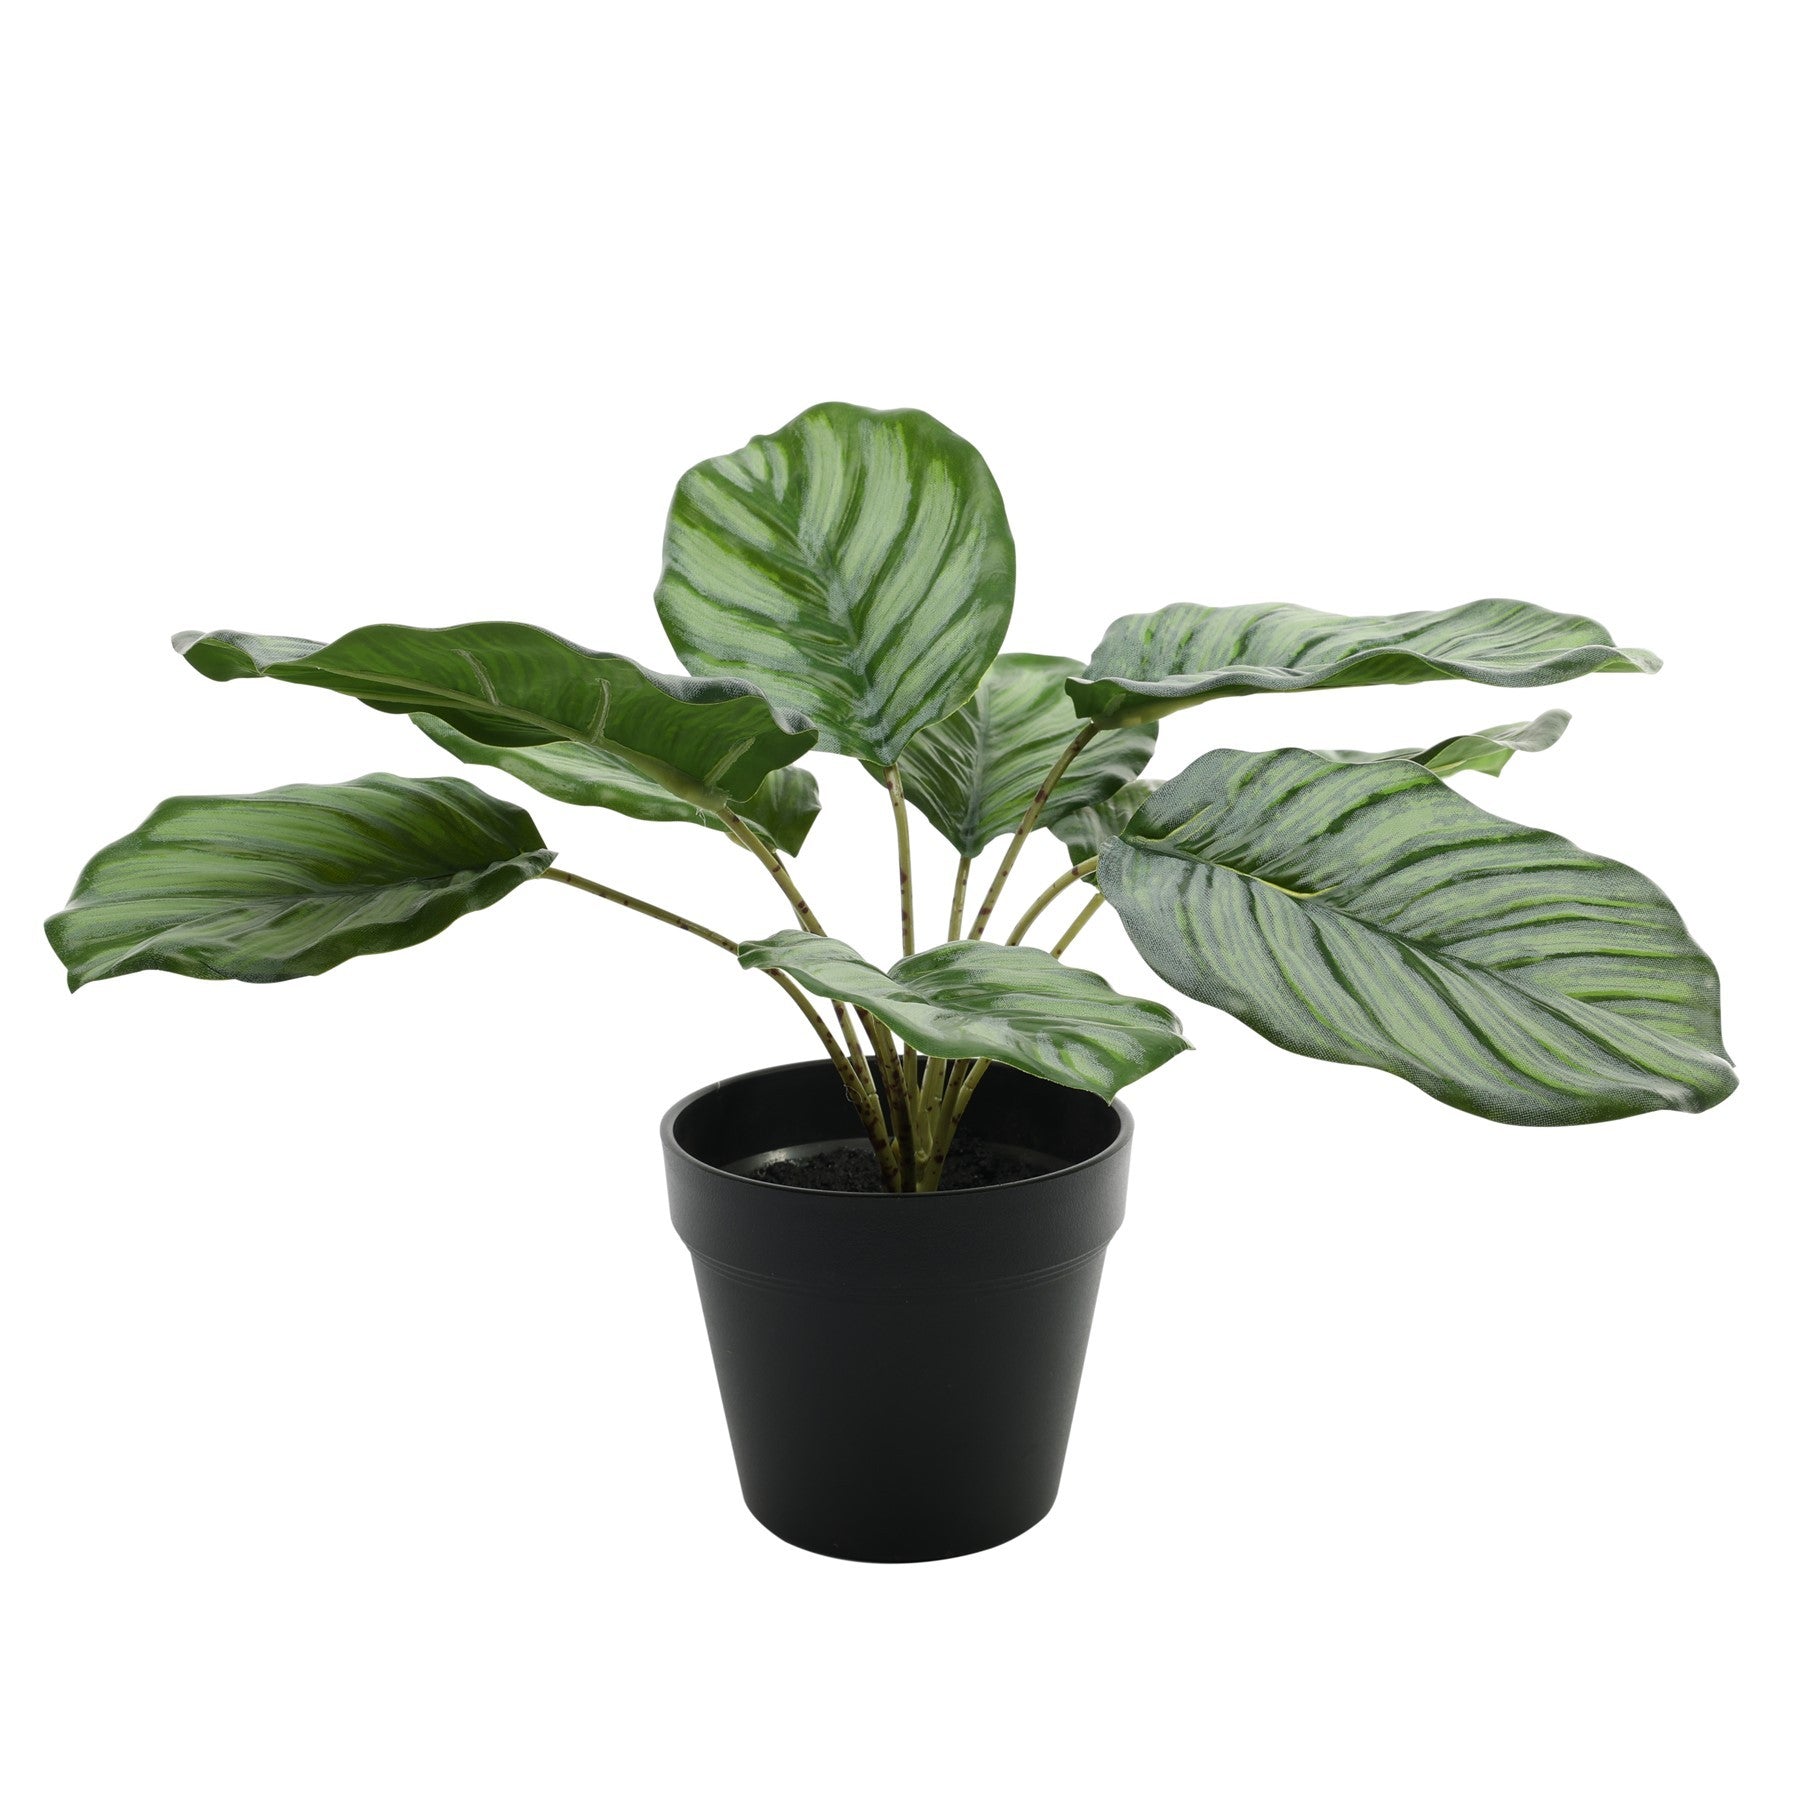 View Calathea Potted Houseplant 30cm information